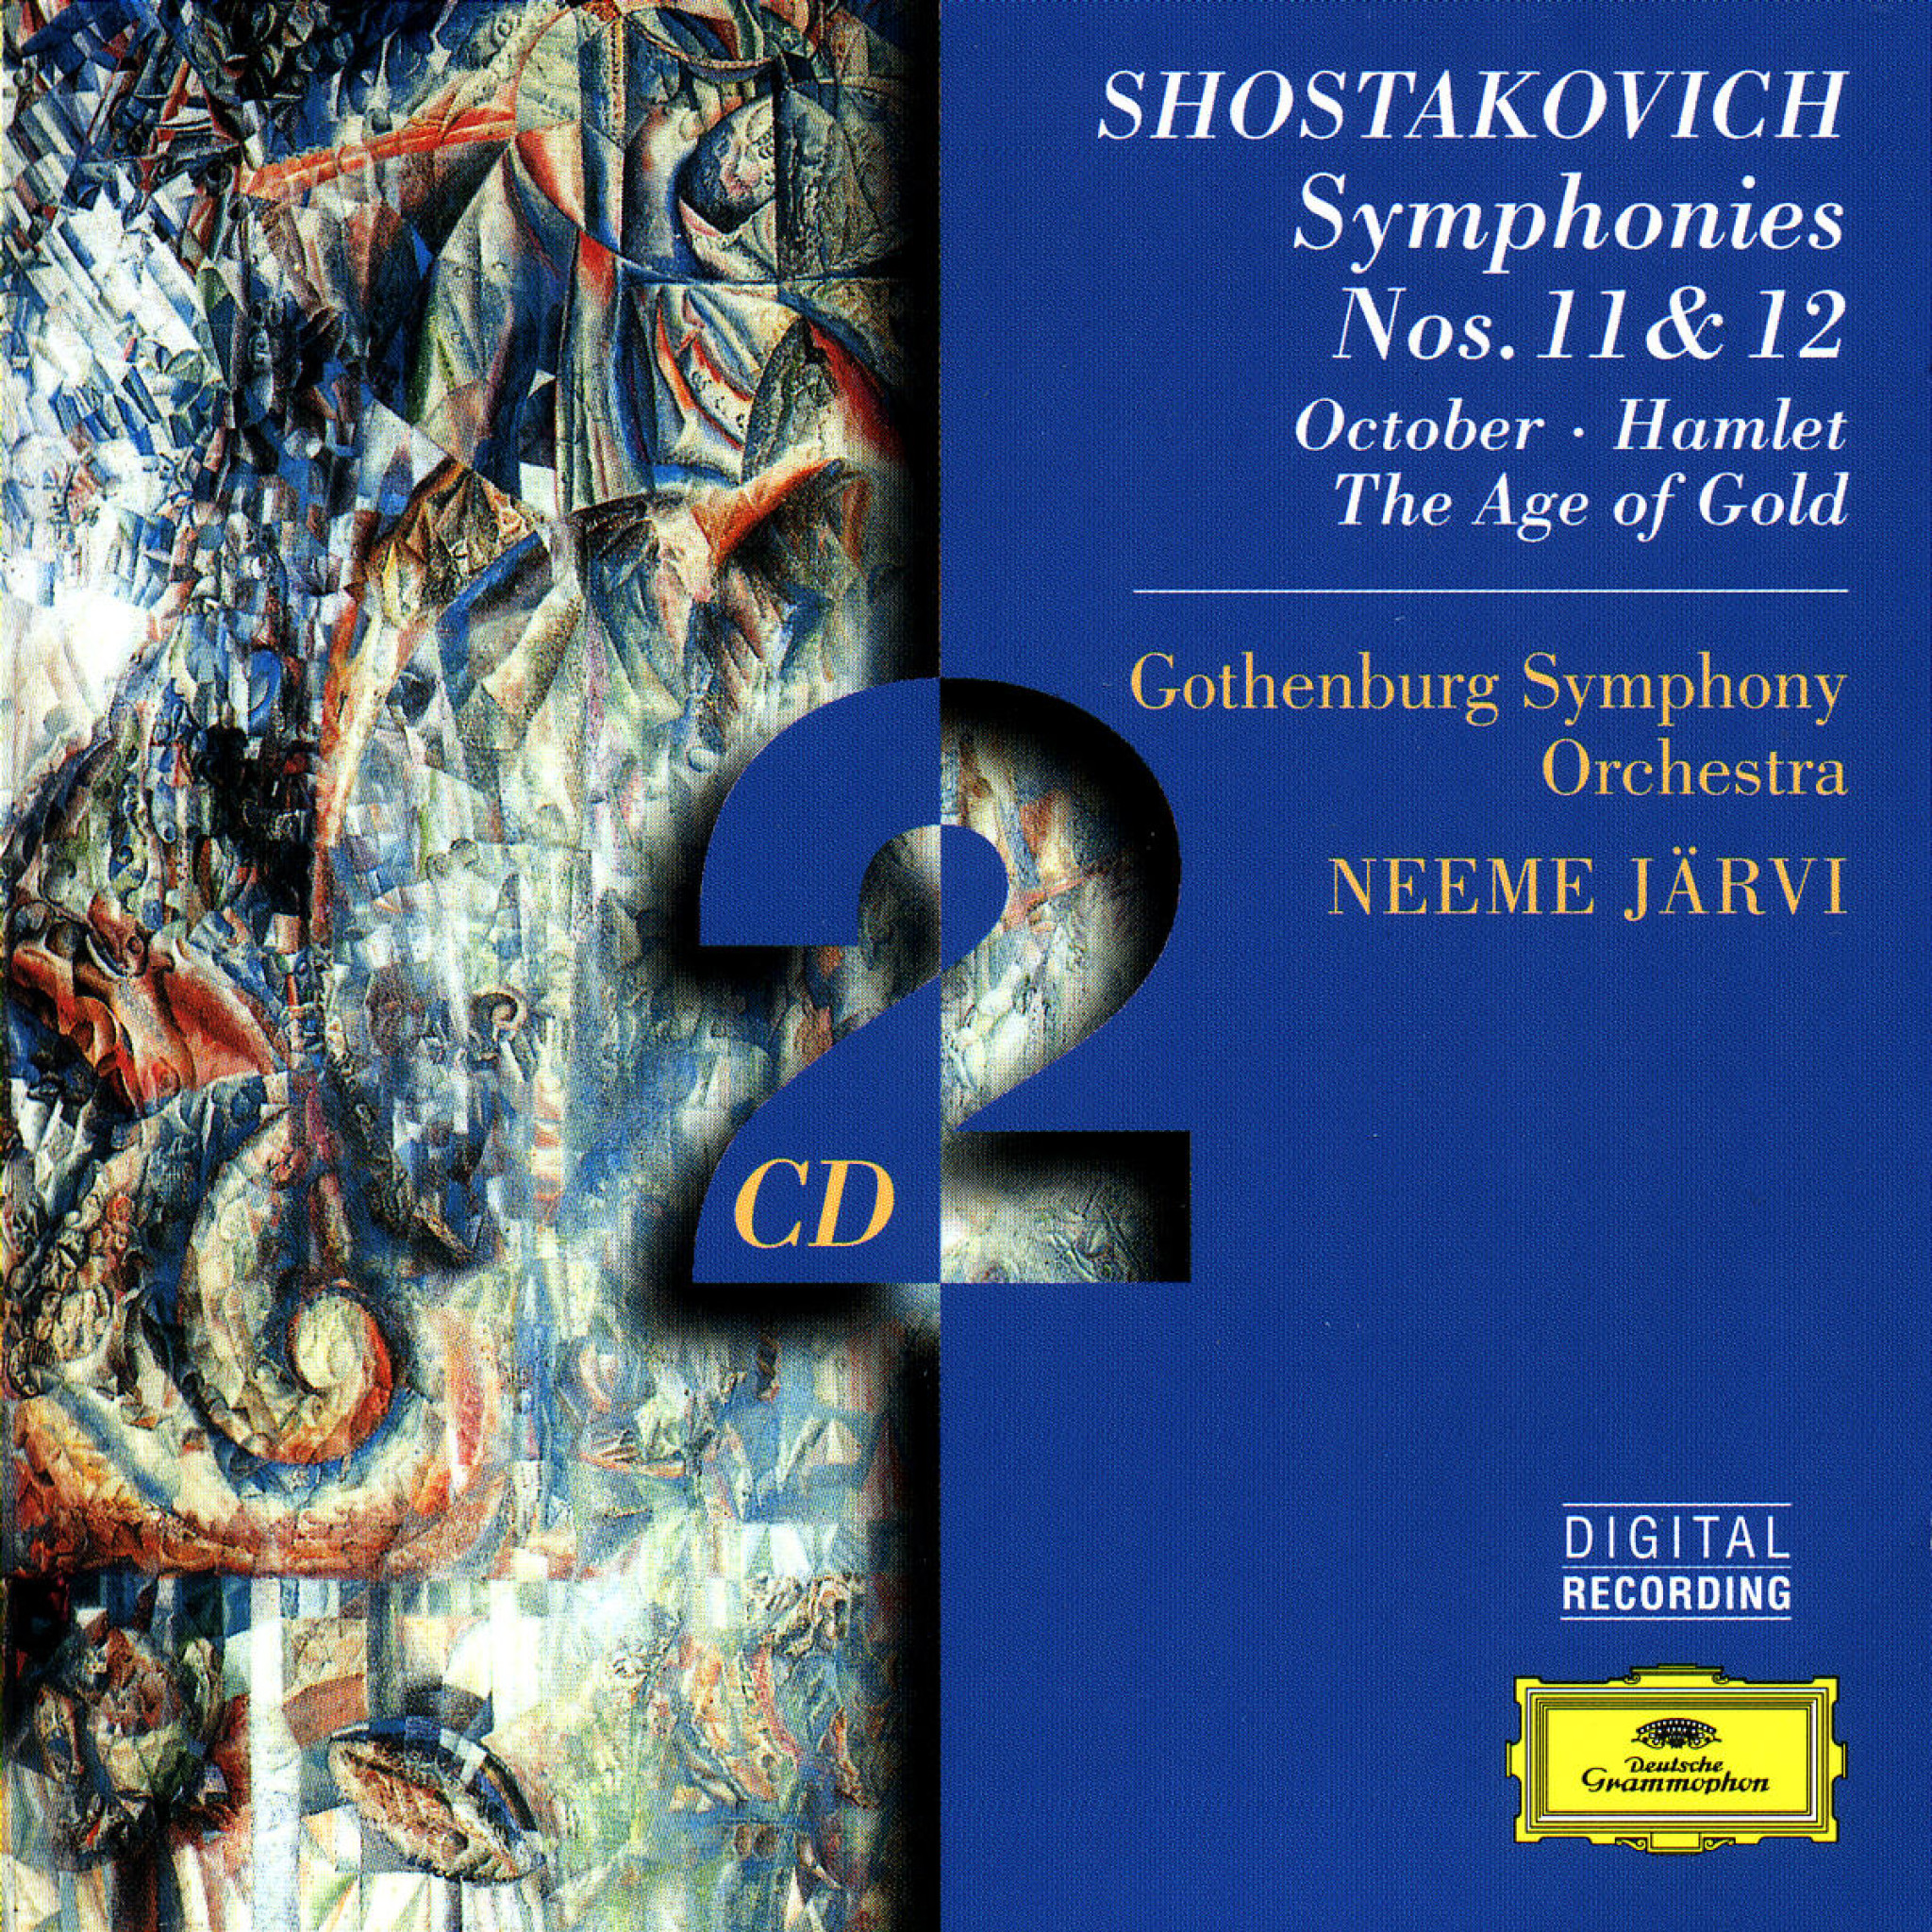 Shostakovich: Symphonies Nos. 11 & 12; October; Hamlet; The Age of Gold 0028945941529